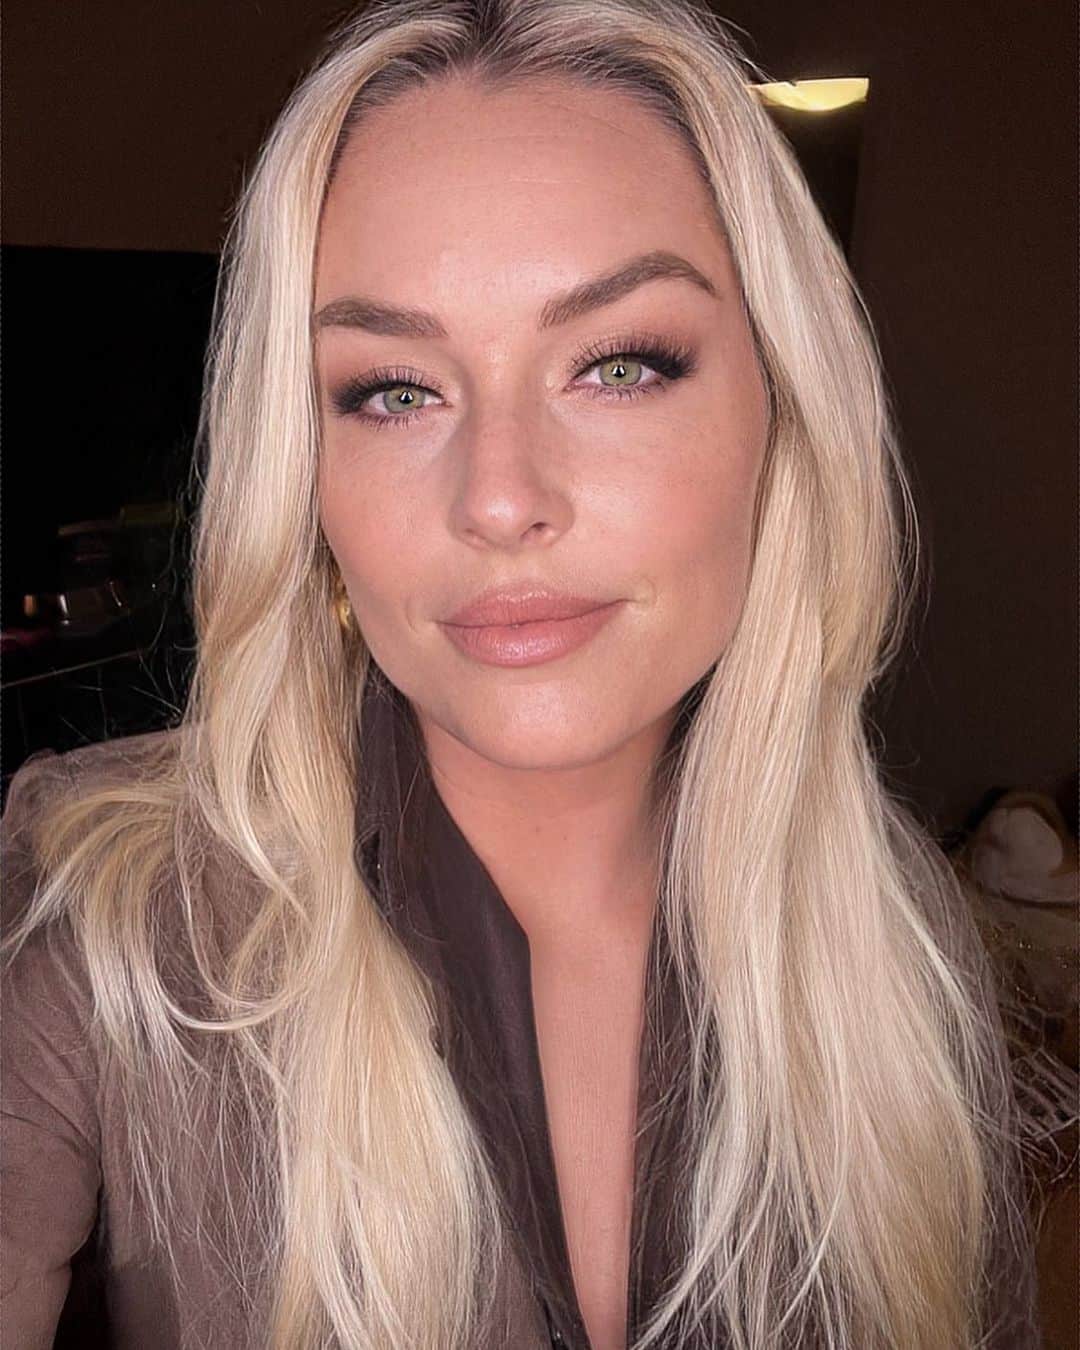 Carolina Gonzalezのインスタグラム：「🤎V O N N🤎 The @lindseyvonn last night in #NYC for the @time 100 Next  Hair @drewschaefering  #Makeupbyme @cgonzalezbeauty  #CGonzalezBeauty    Using: @bioeffectofficial  EFG Power Cream  EFG Power Serum    @armanibeauty  Luminous Silk Concealer 5.25  Luminous Silk Foundation 5.5, 5.75  Luminous Silk Glow Setting Powder in 4  Luminous Silk Glow Liquid Bronzer in 90  Eyes To Kill Mascara Classico  Eye Tints in 22,30,99 Lip Power Mayte 111   @milkmakeup  Contour Stick in Toasted and Stoked    @ardellbeauty  Naked Lashes in 421」